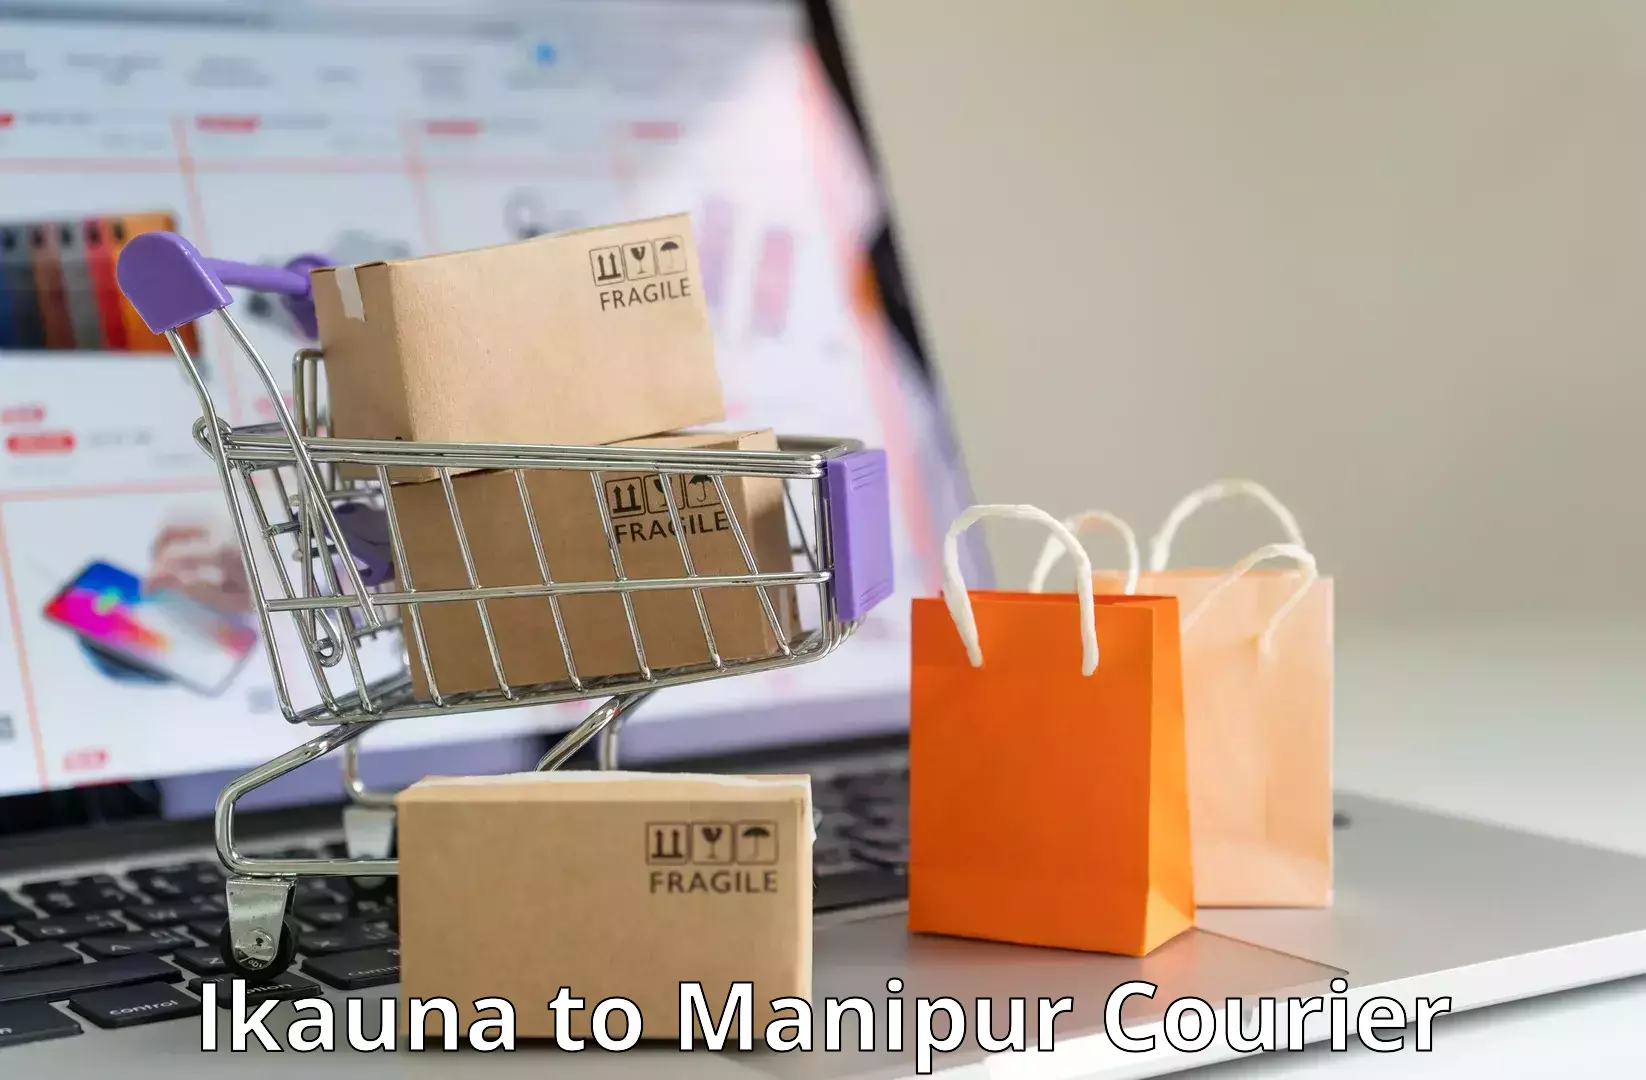 Supply chain delivery Ikauna to Manipur